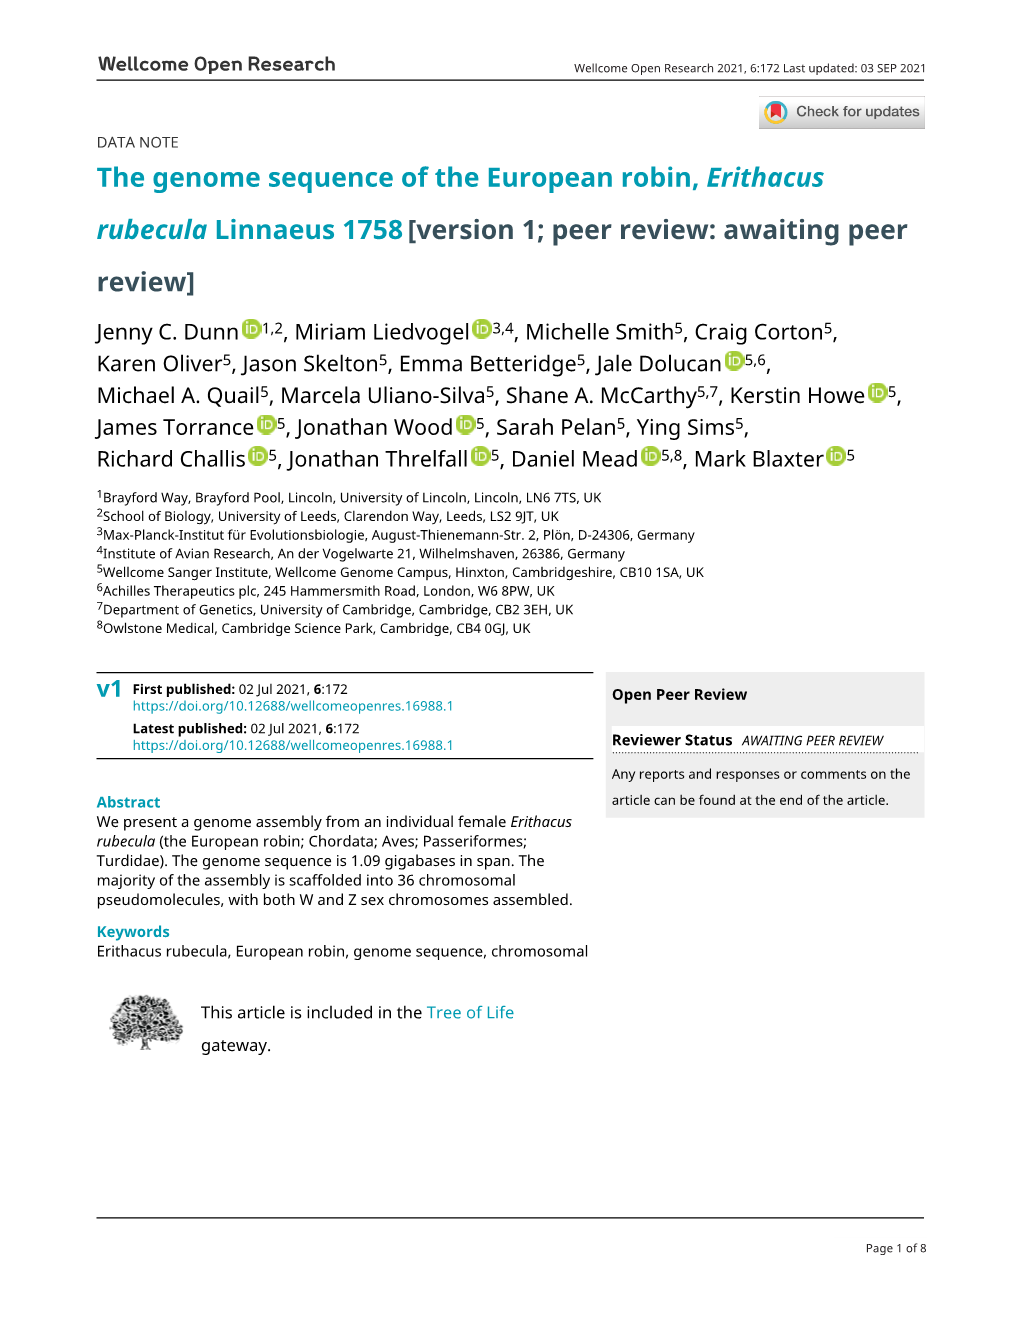 The Genome Sequence of the European Robin, Erithacus Rubecula Linnaeus 1758 [Version 1; Peer Review: Awaiting Peer Review]